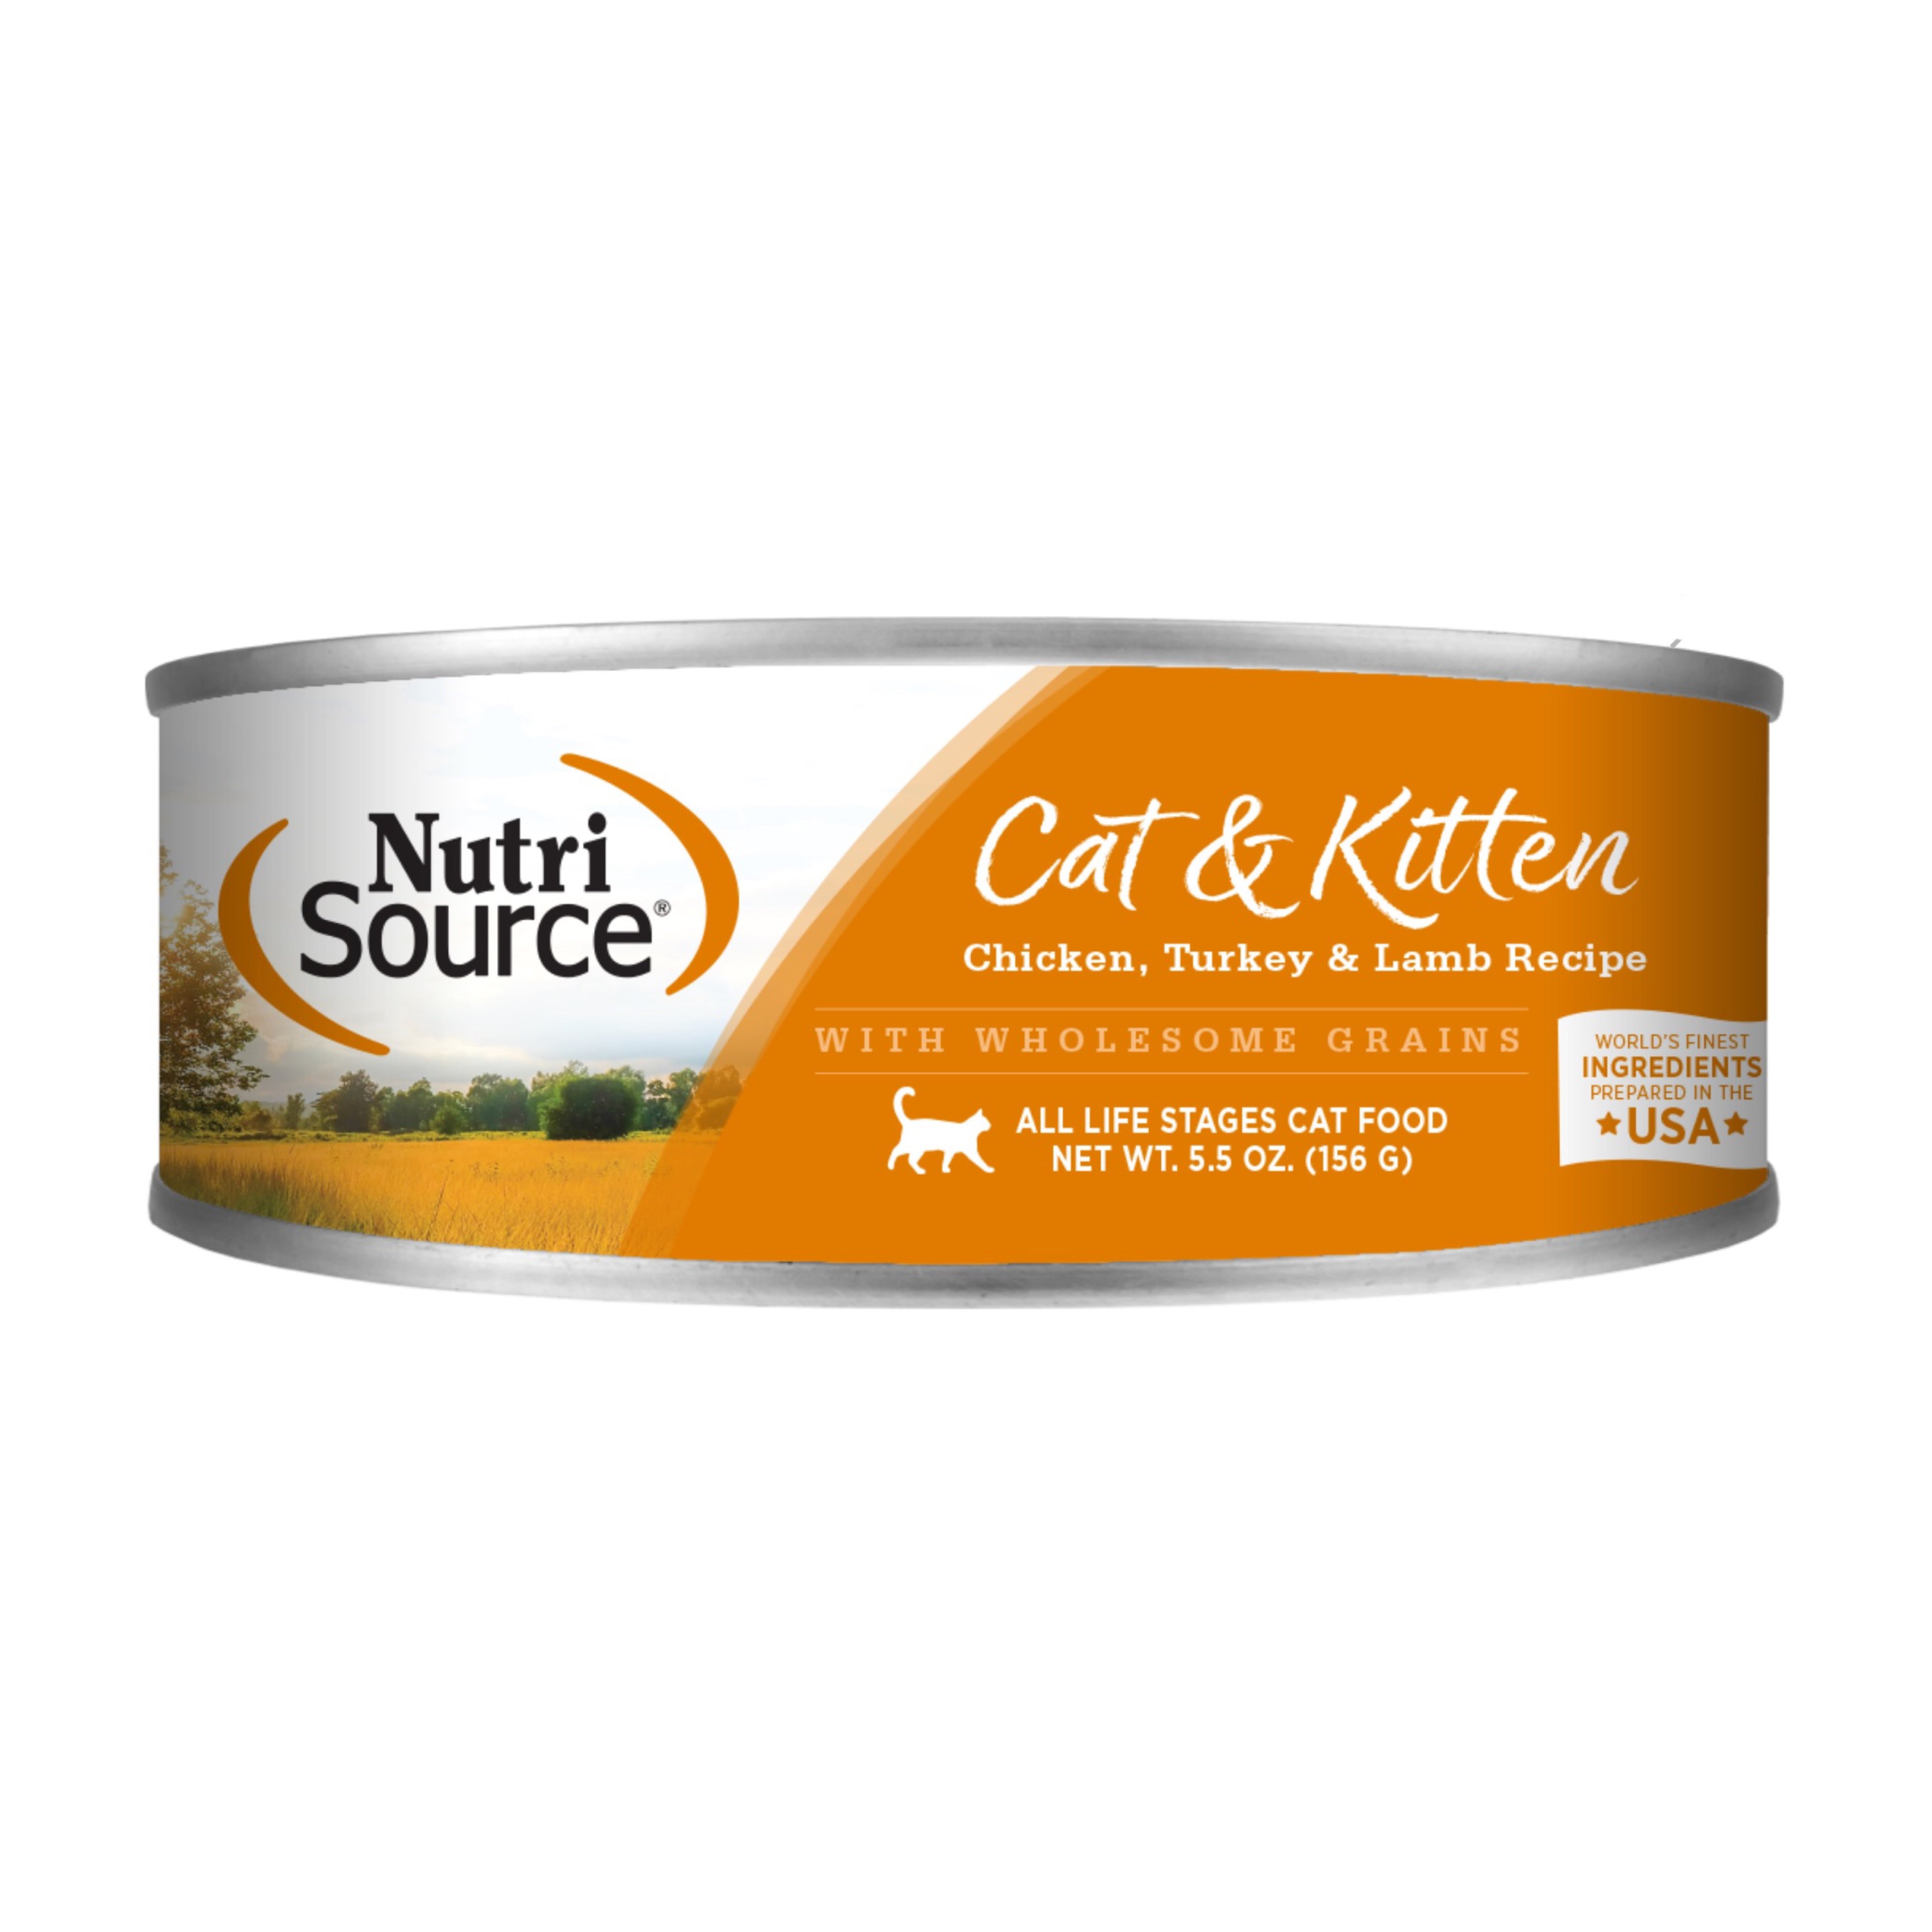 NutriSource Cat & Kitten Chicken, Turkey & Lamb Recipe With Wholesome Grains Canned Cat Food - 5.5oz